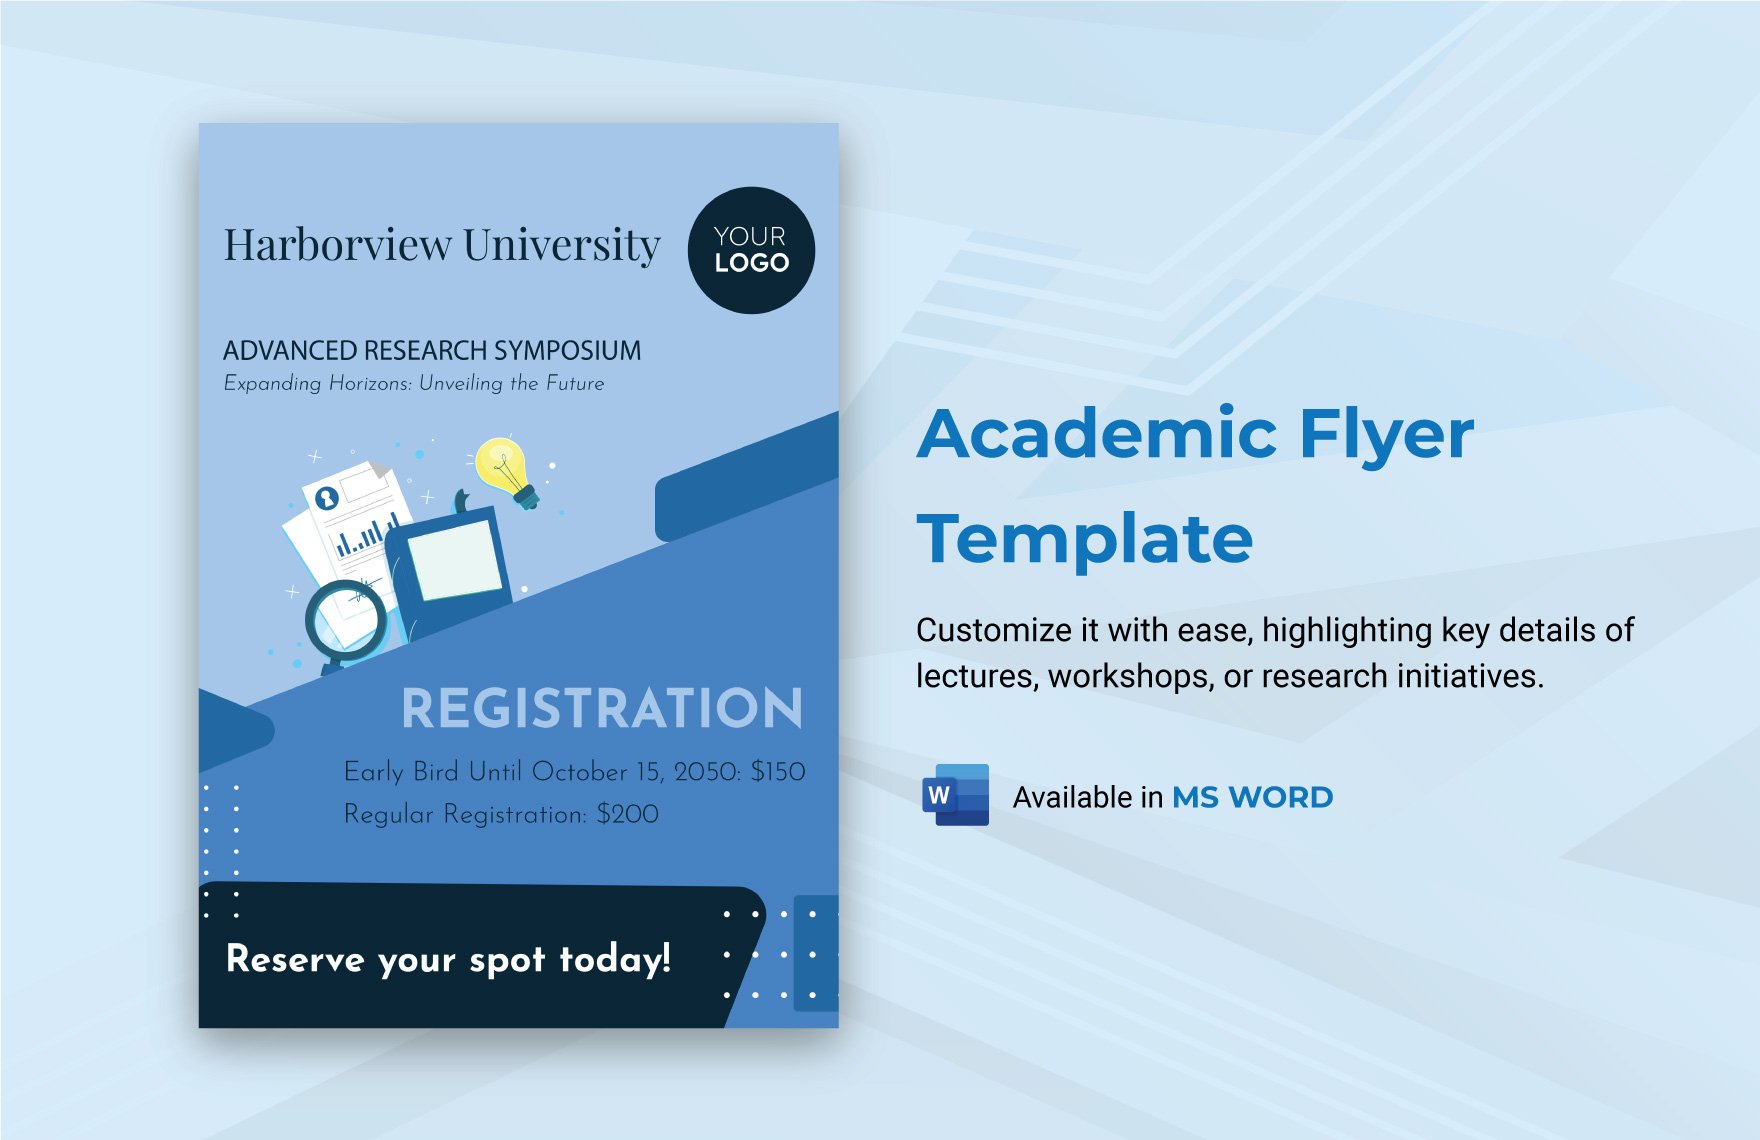 Academic Flyer Template in Word, Publisher